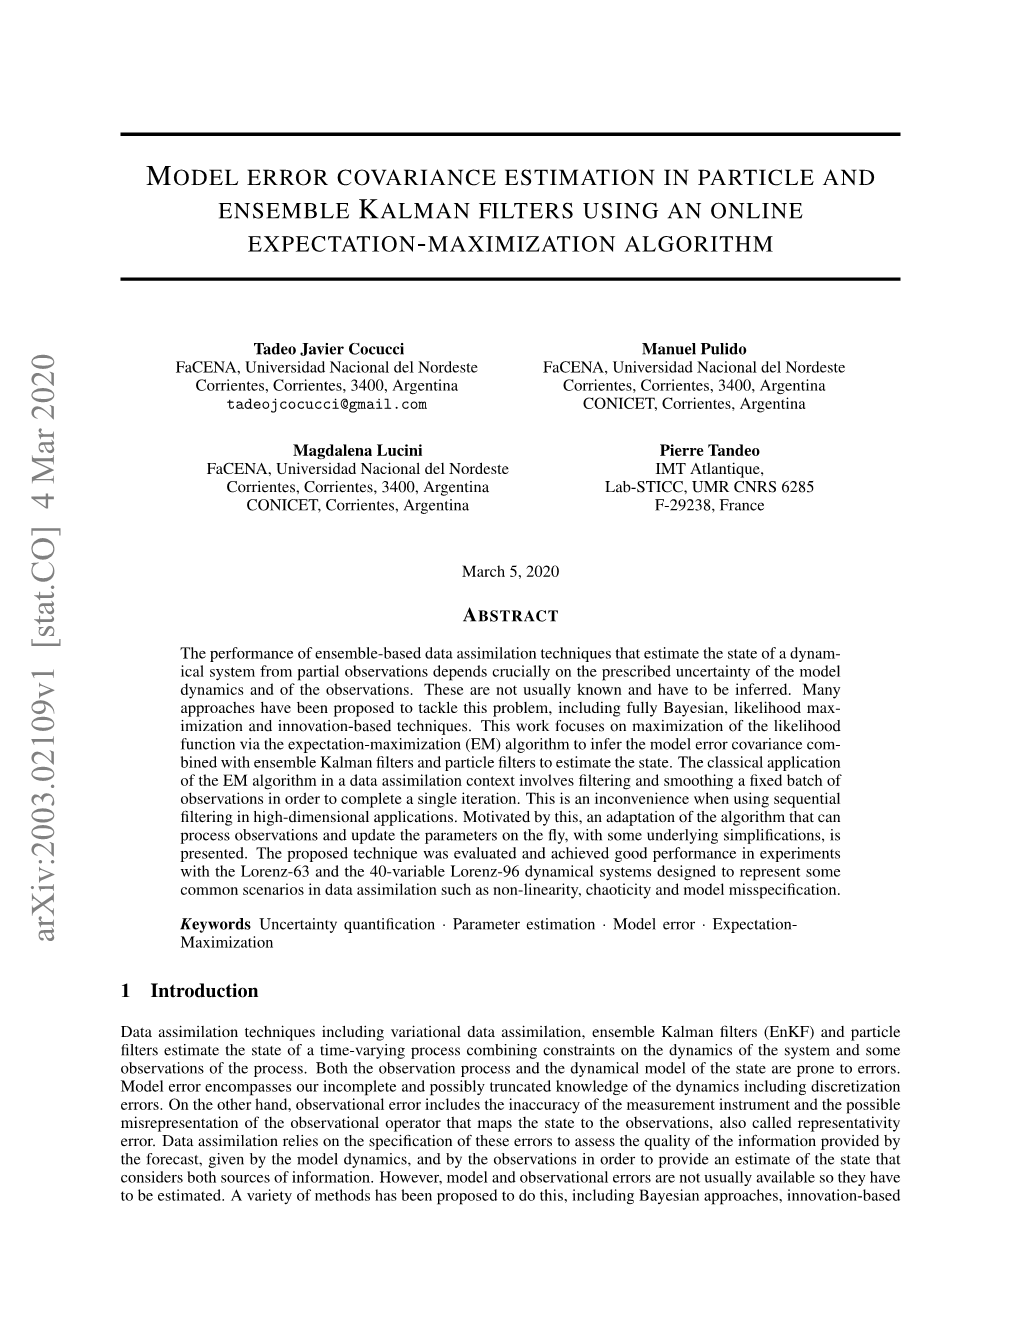 Model Error Covariance Estimation in Particle and Ensemble Kalman Filters Using an Online Expectation-Maximization Algorithm